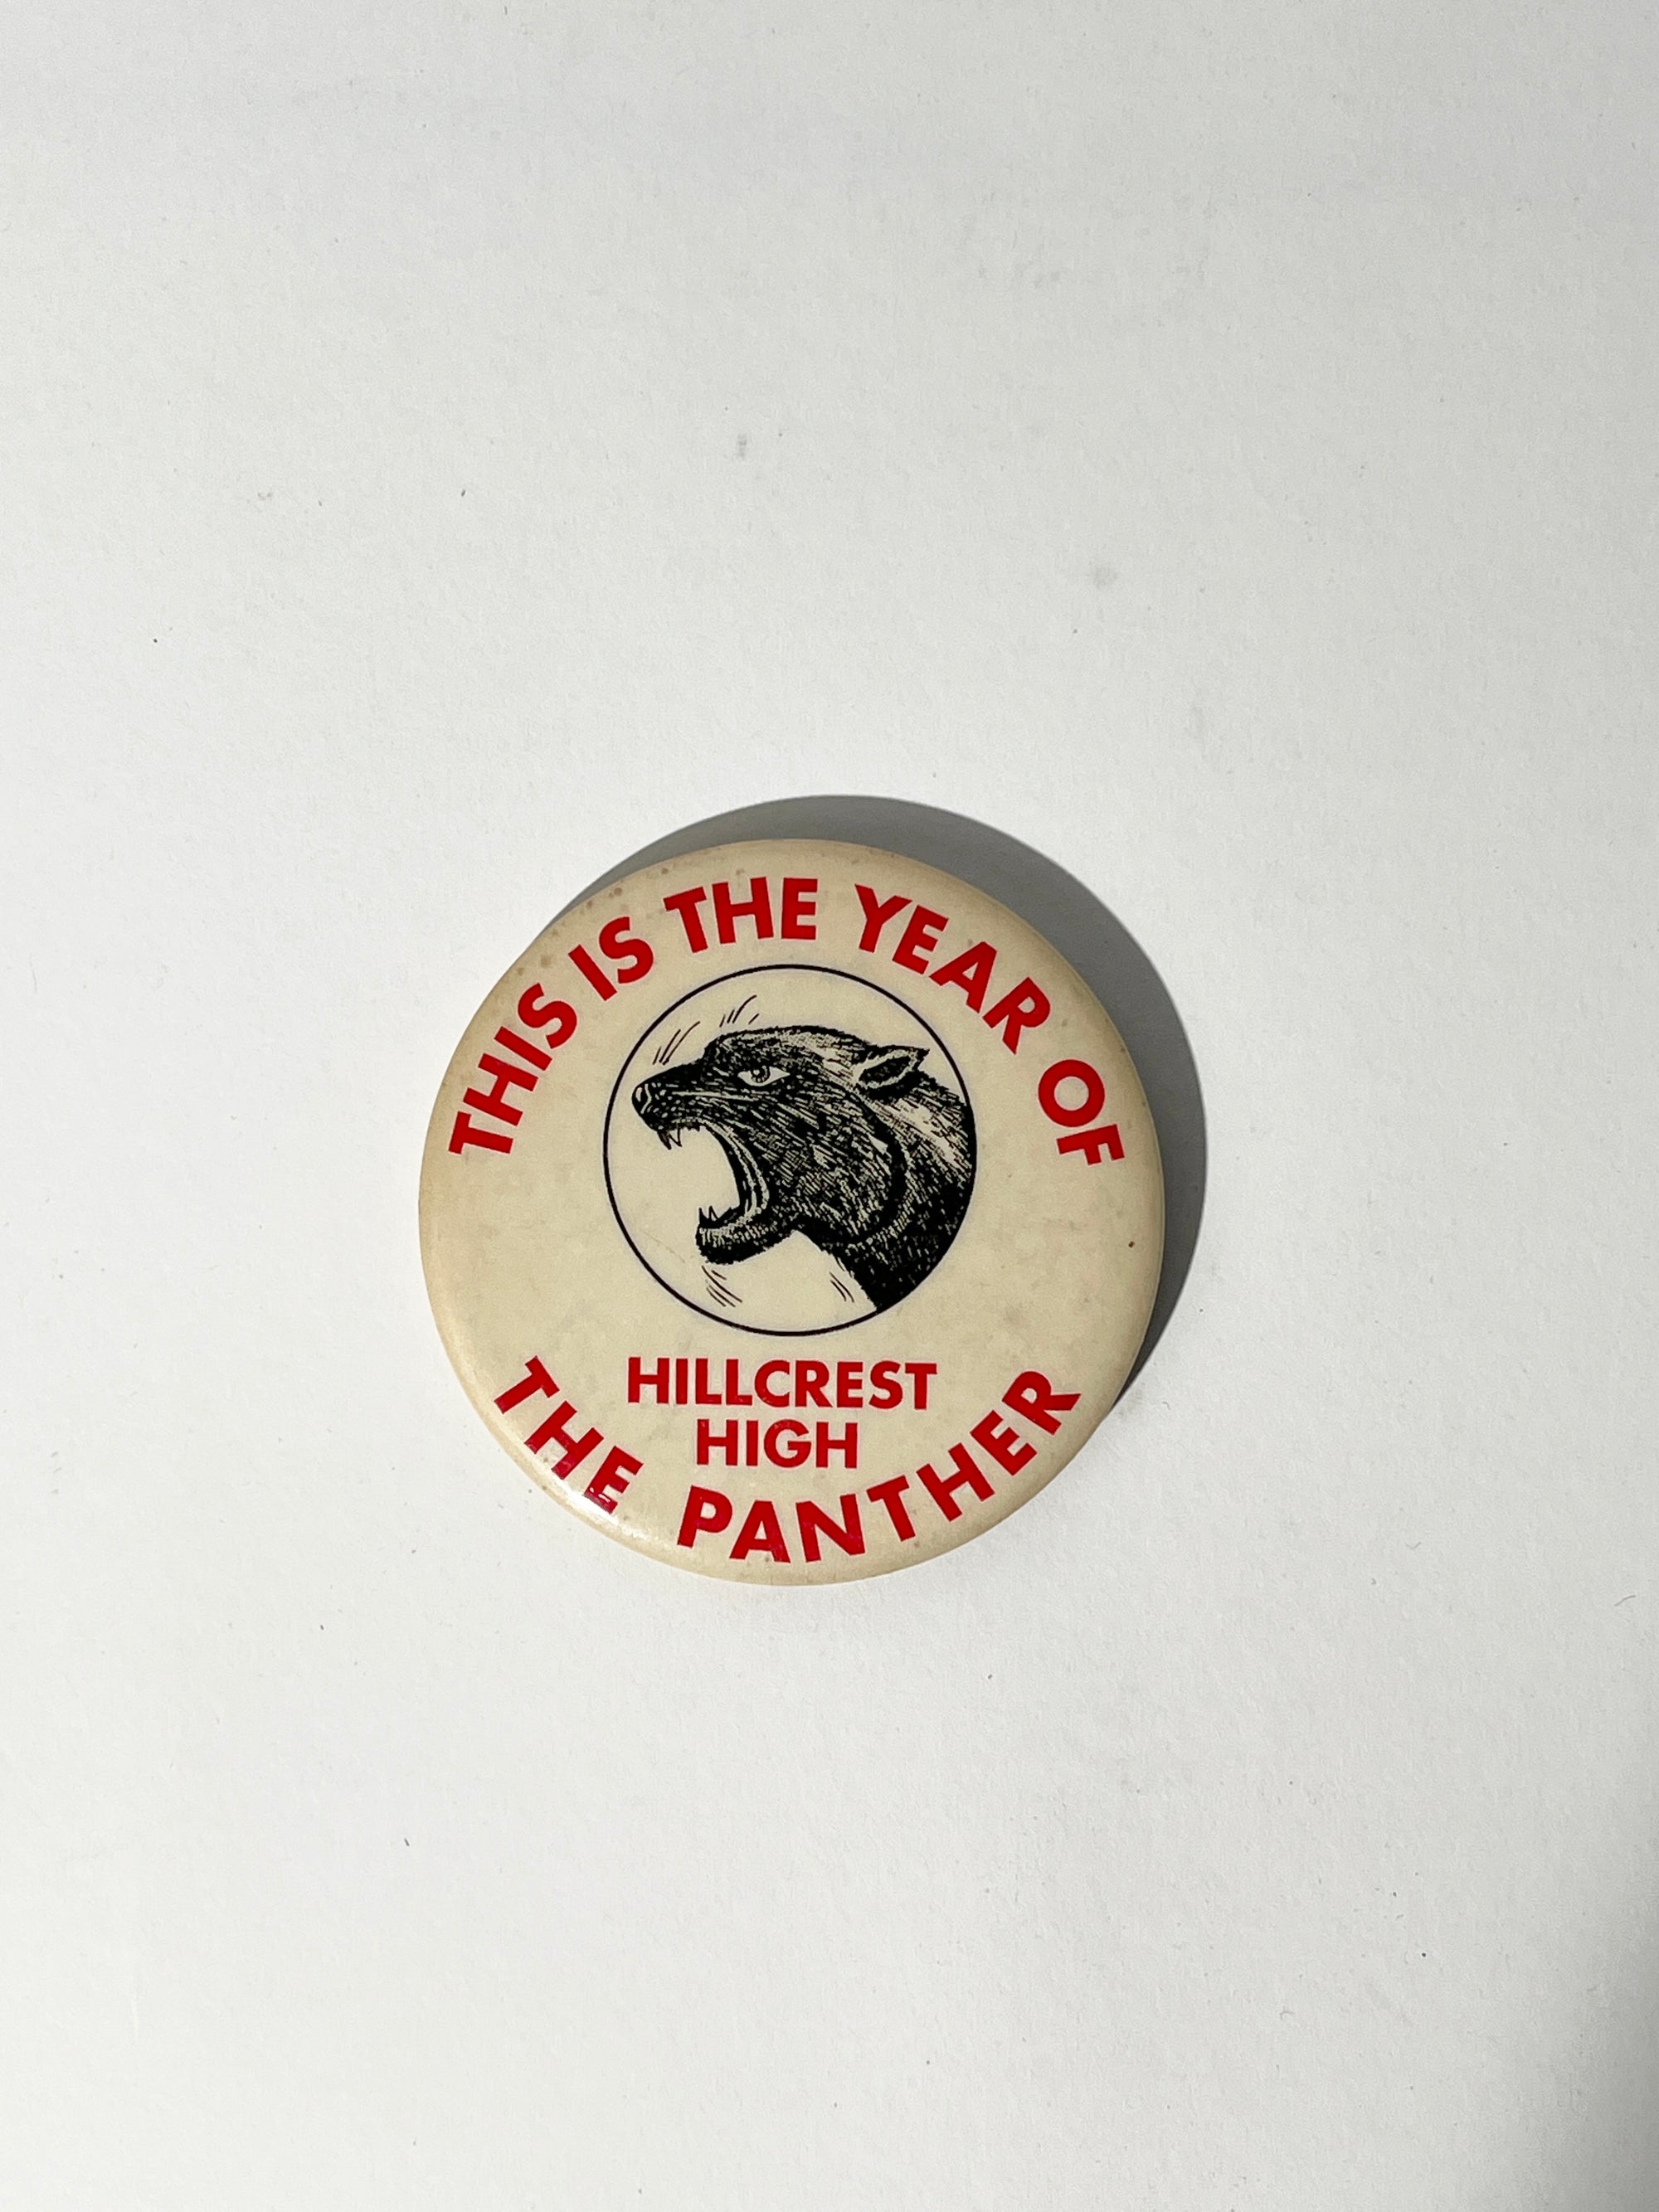 Hillcrest High "The Year of the Panther" Pin